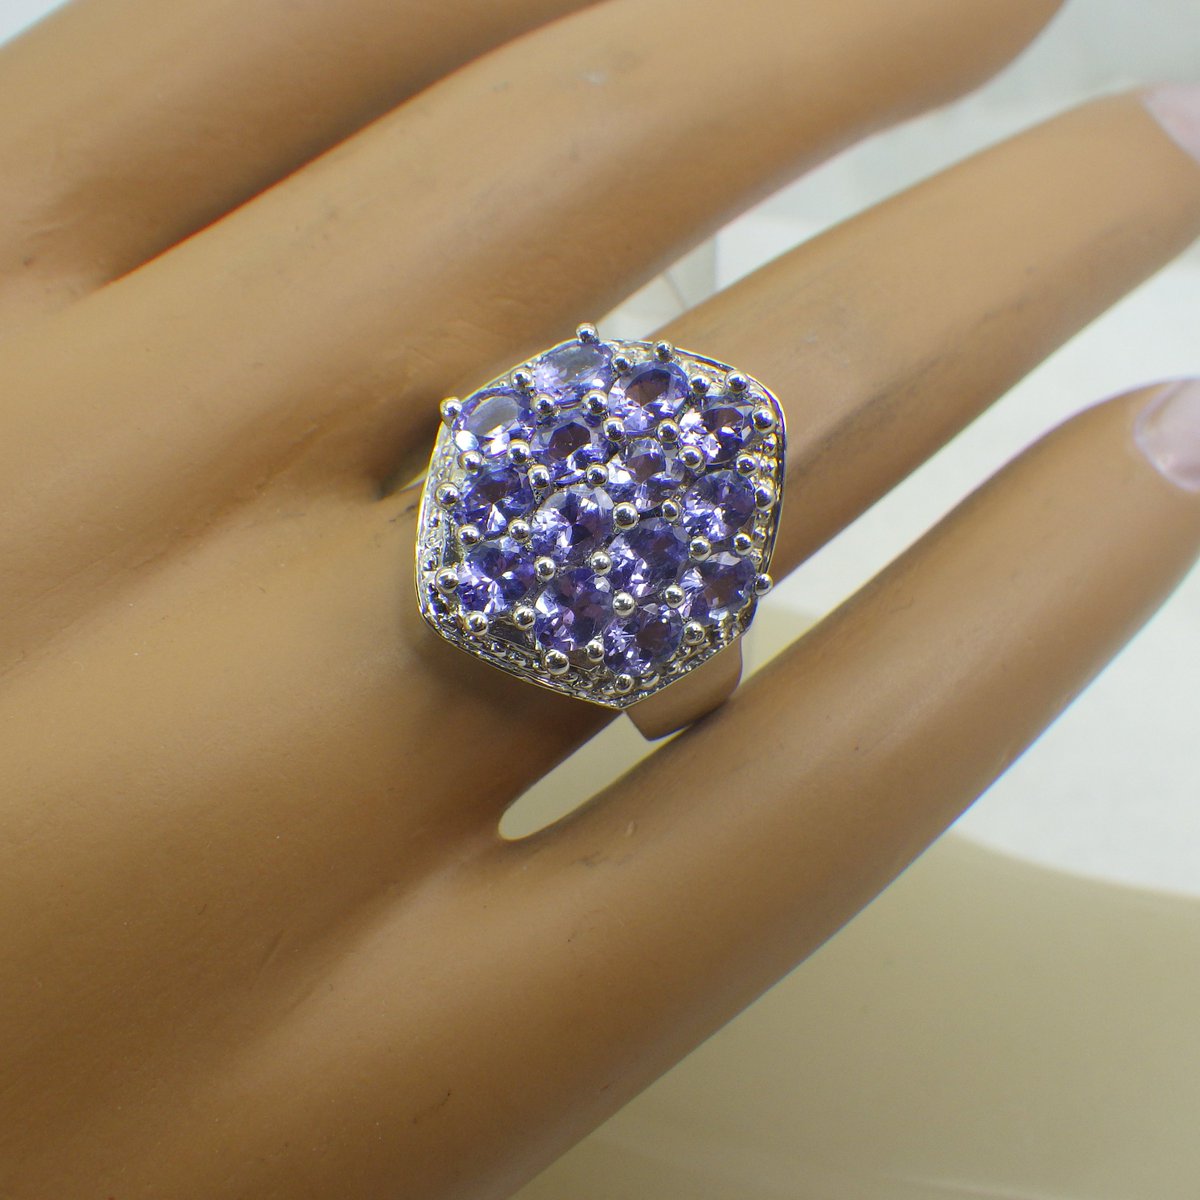 Excited to share the latest addition to my #etsyshop: #Tanzanite Gemstone Ring #Sterling Hexagonal Shape #PartyJewelry Genuine Tanzanite Gemstones Purple gems #BlingRing Gift For Her Fine Jewelry etsy.me/2SjgwvP #jewelry #ring #VintageLoveByDiana